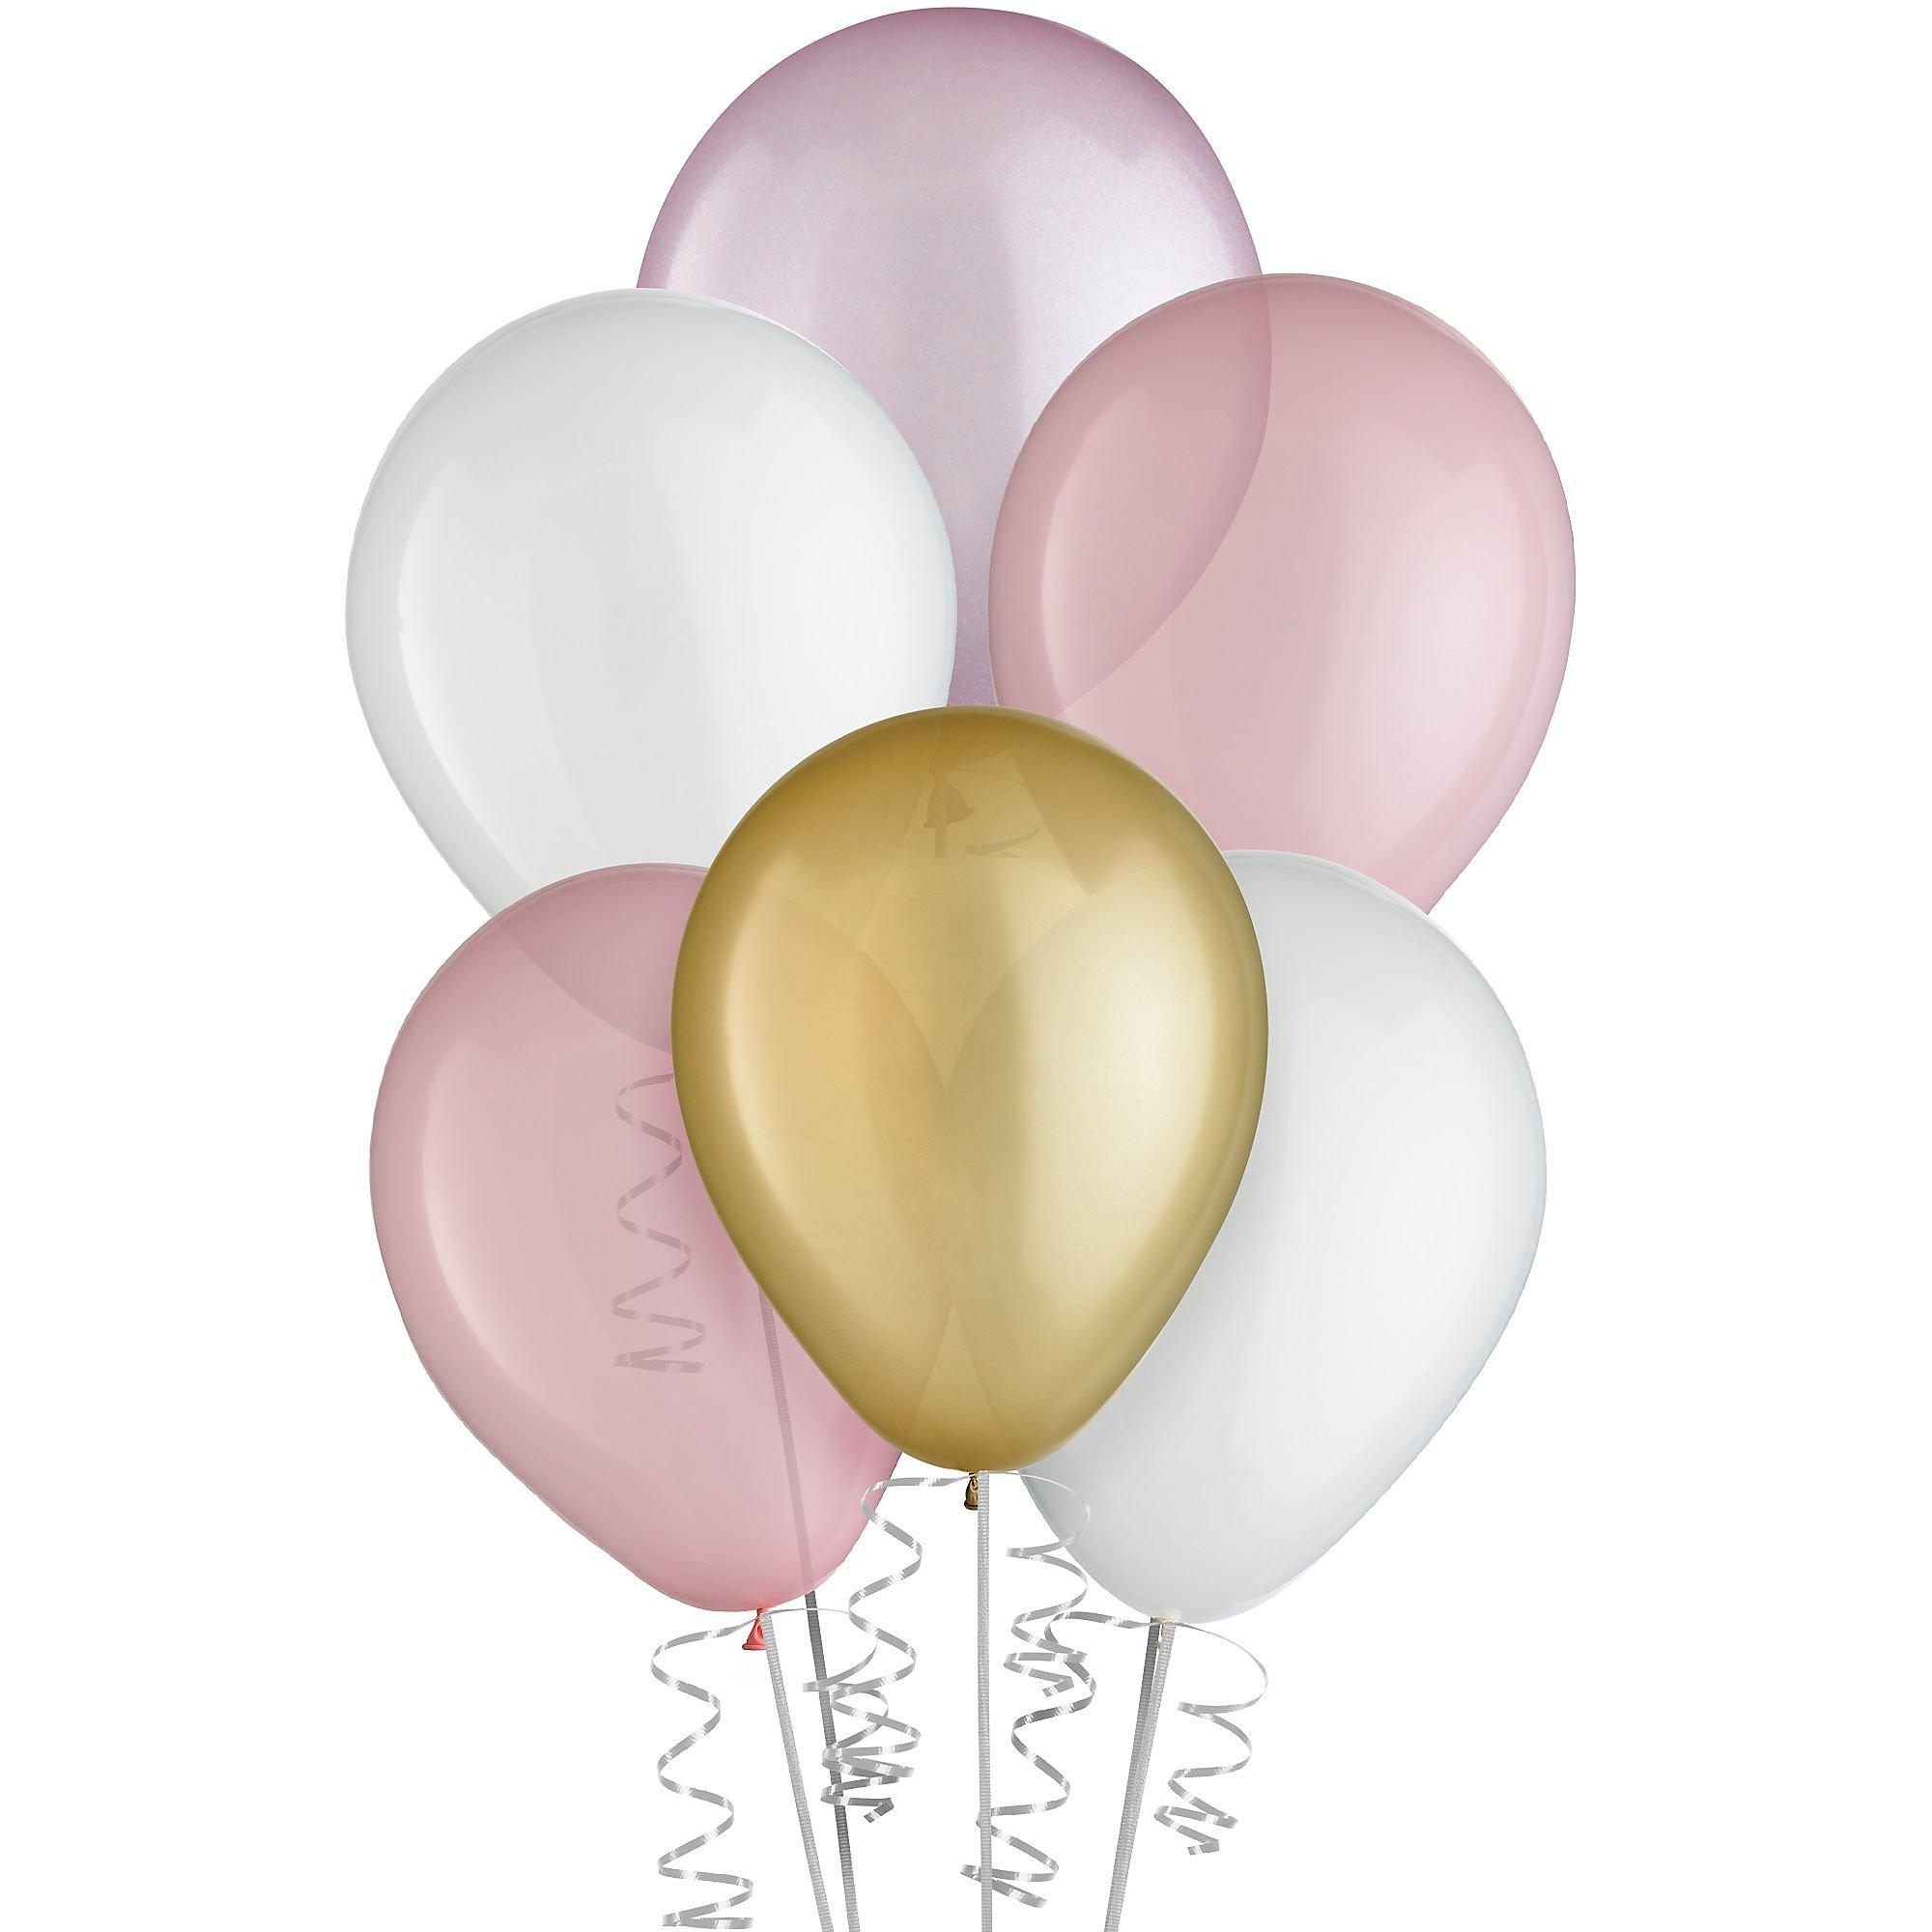 15ct, 11in, Pastel Pink 4-Color Mix Latex Balloons - Pinks, Gold & White